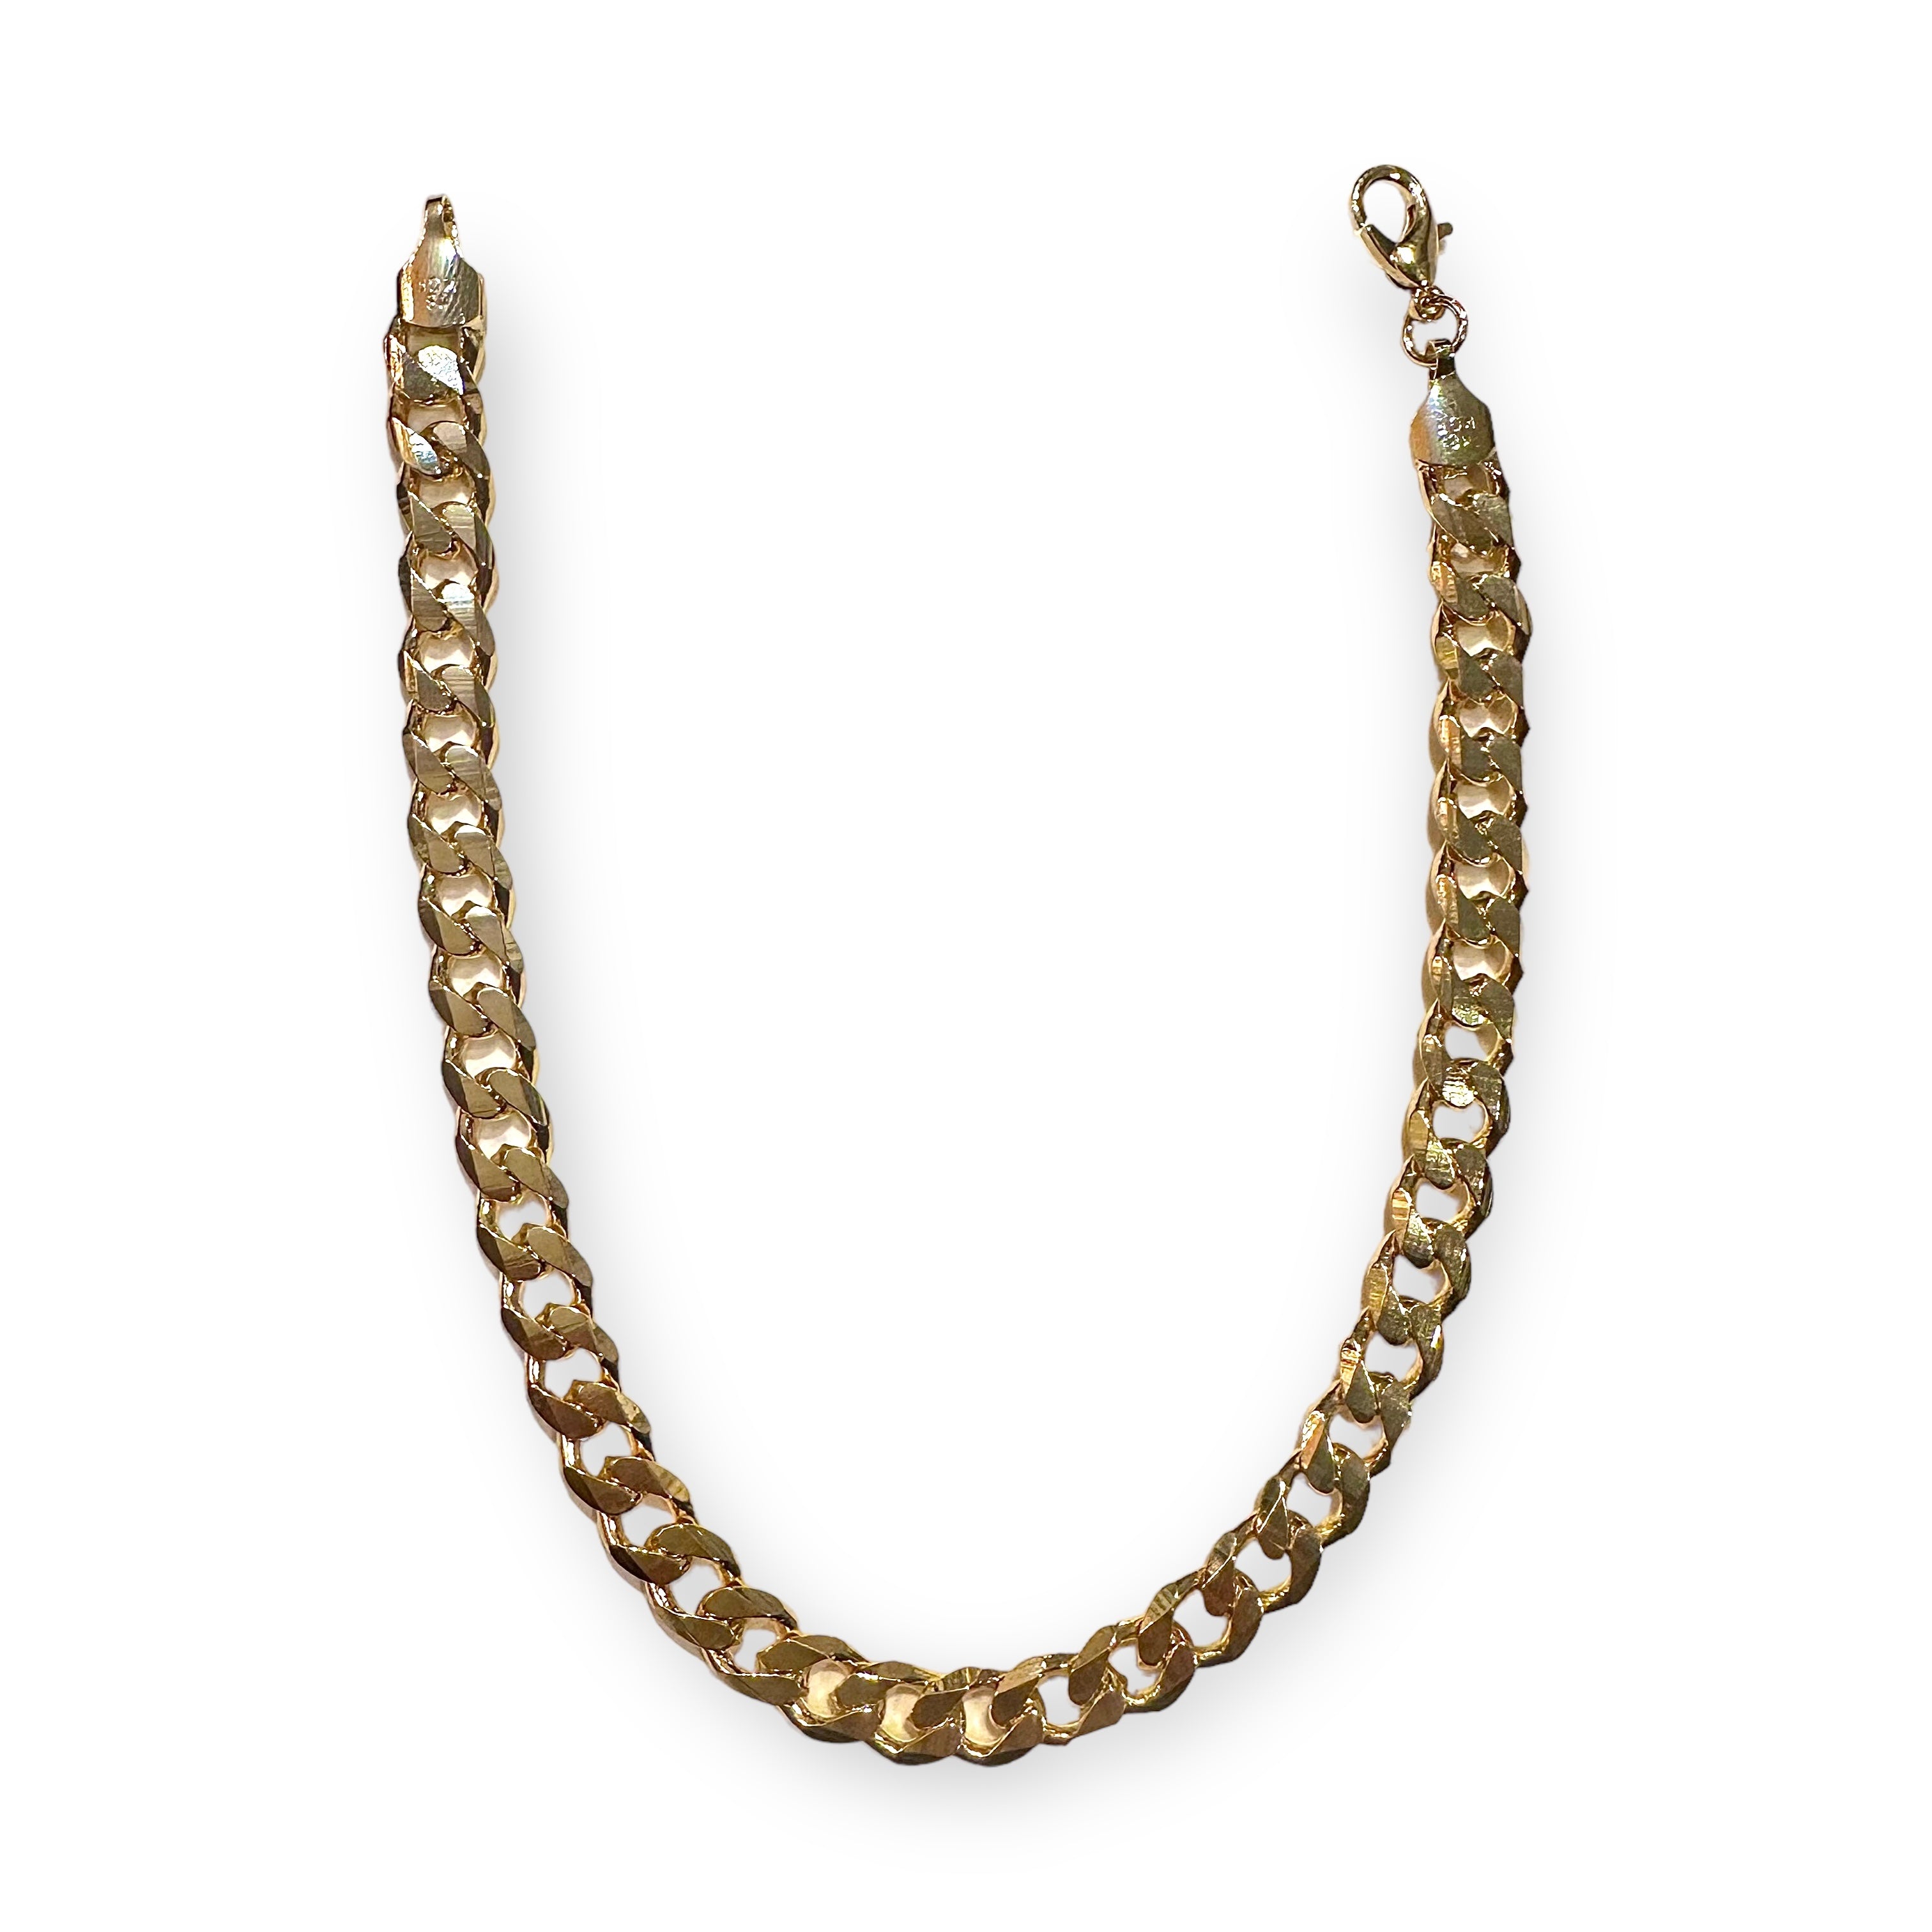 18K Gold Filled Cuban Chain 8mm Thick Anklet